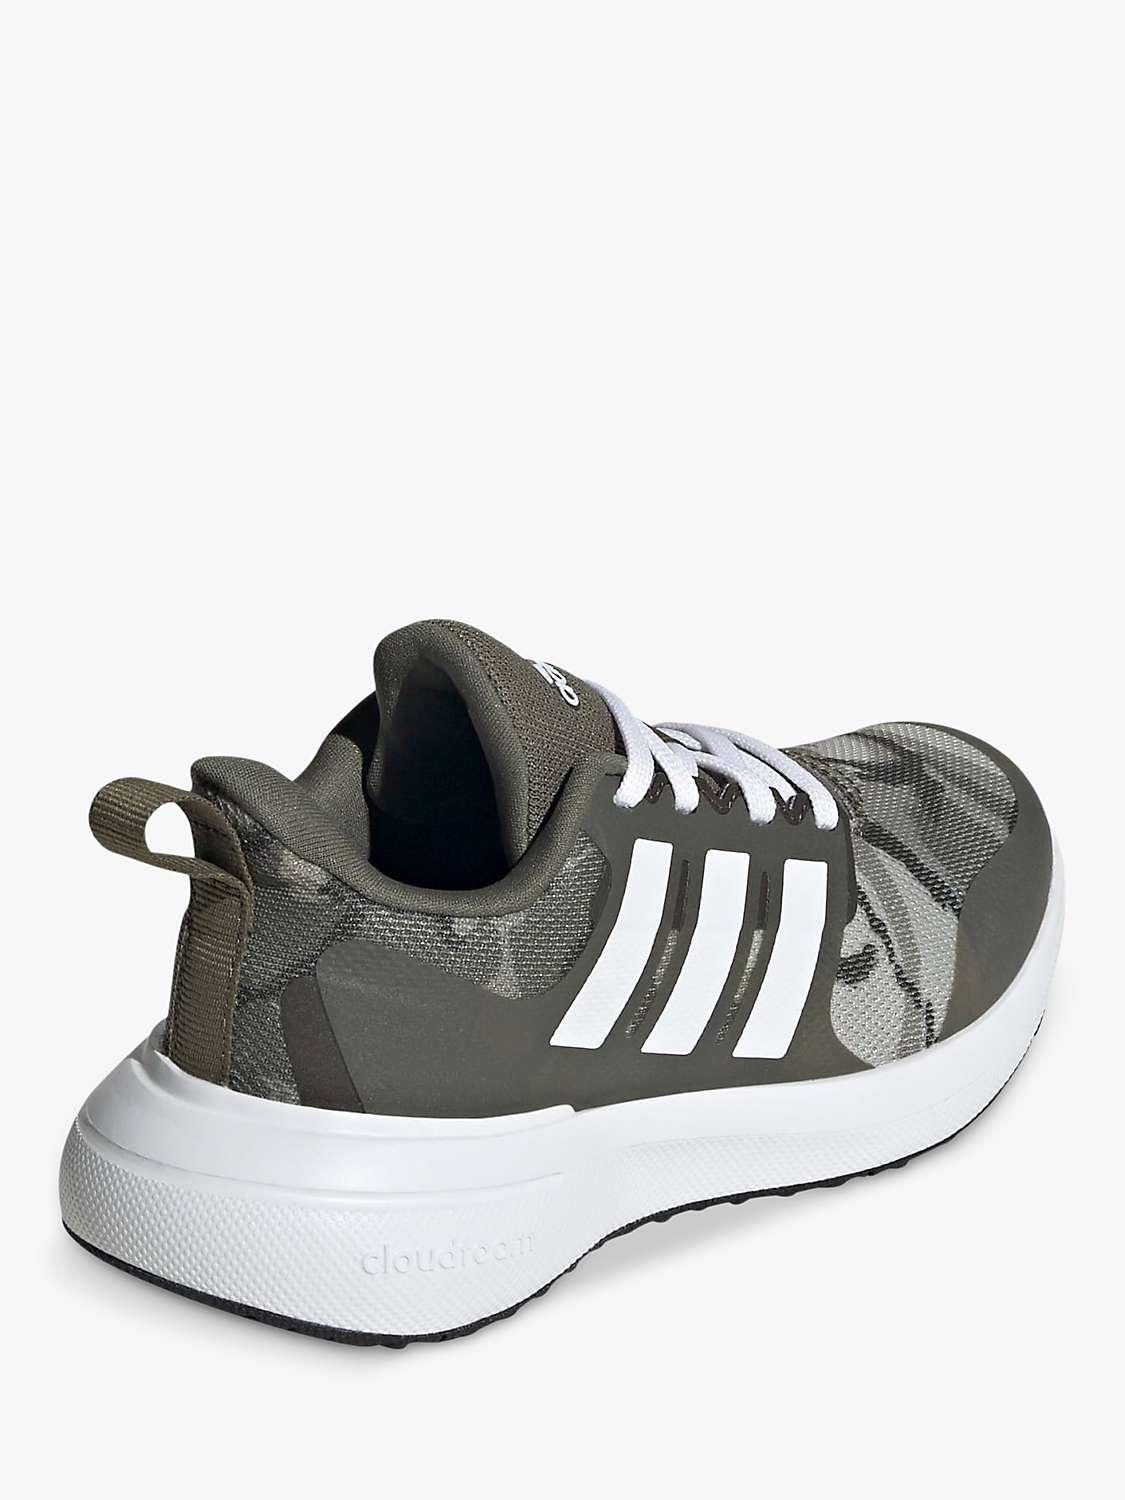 Buy adidas Kids' Fortarun 2.0 Lace Up Camouflage Trainers, Olive/White Online at johnlewis.com